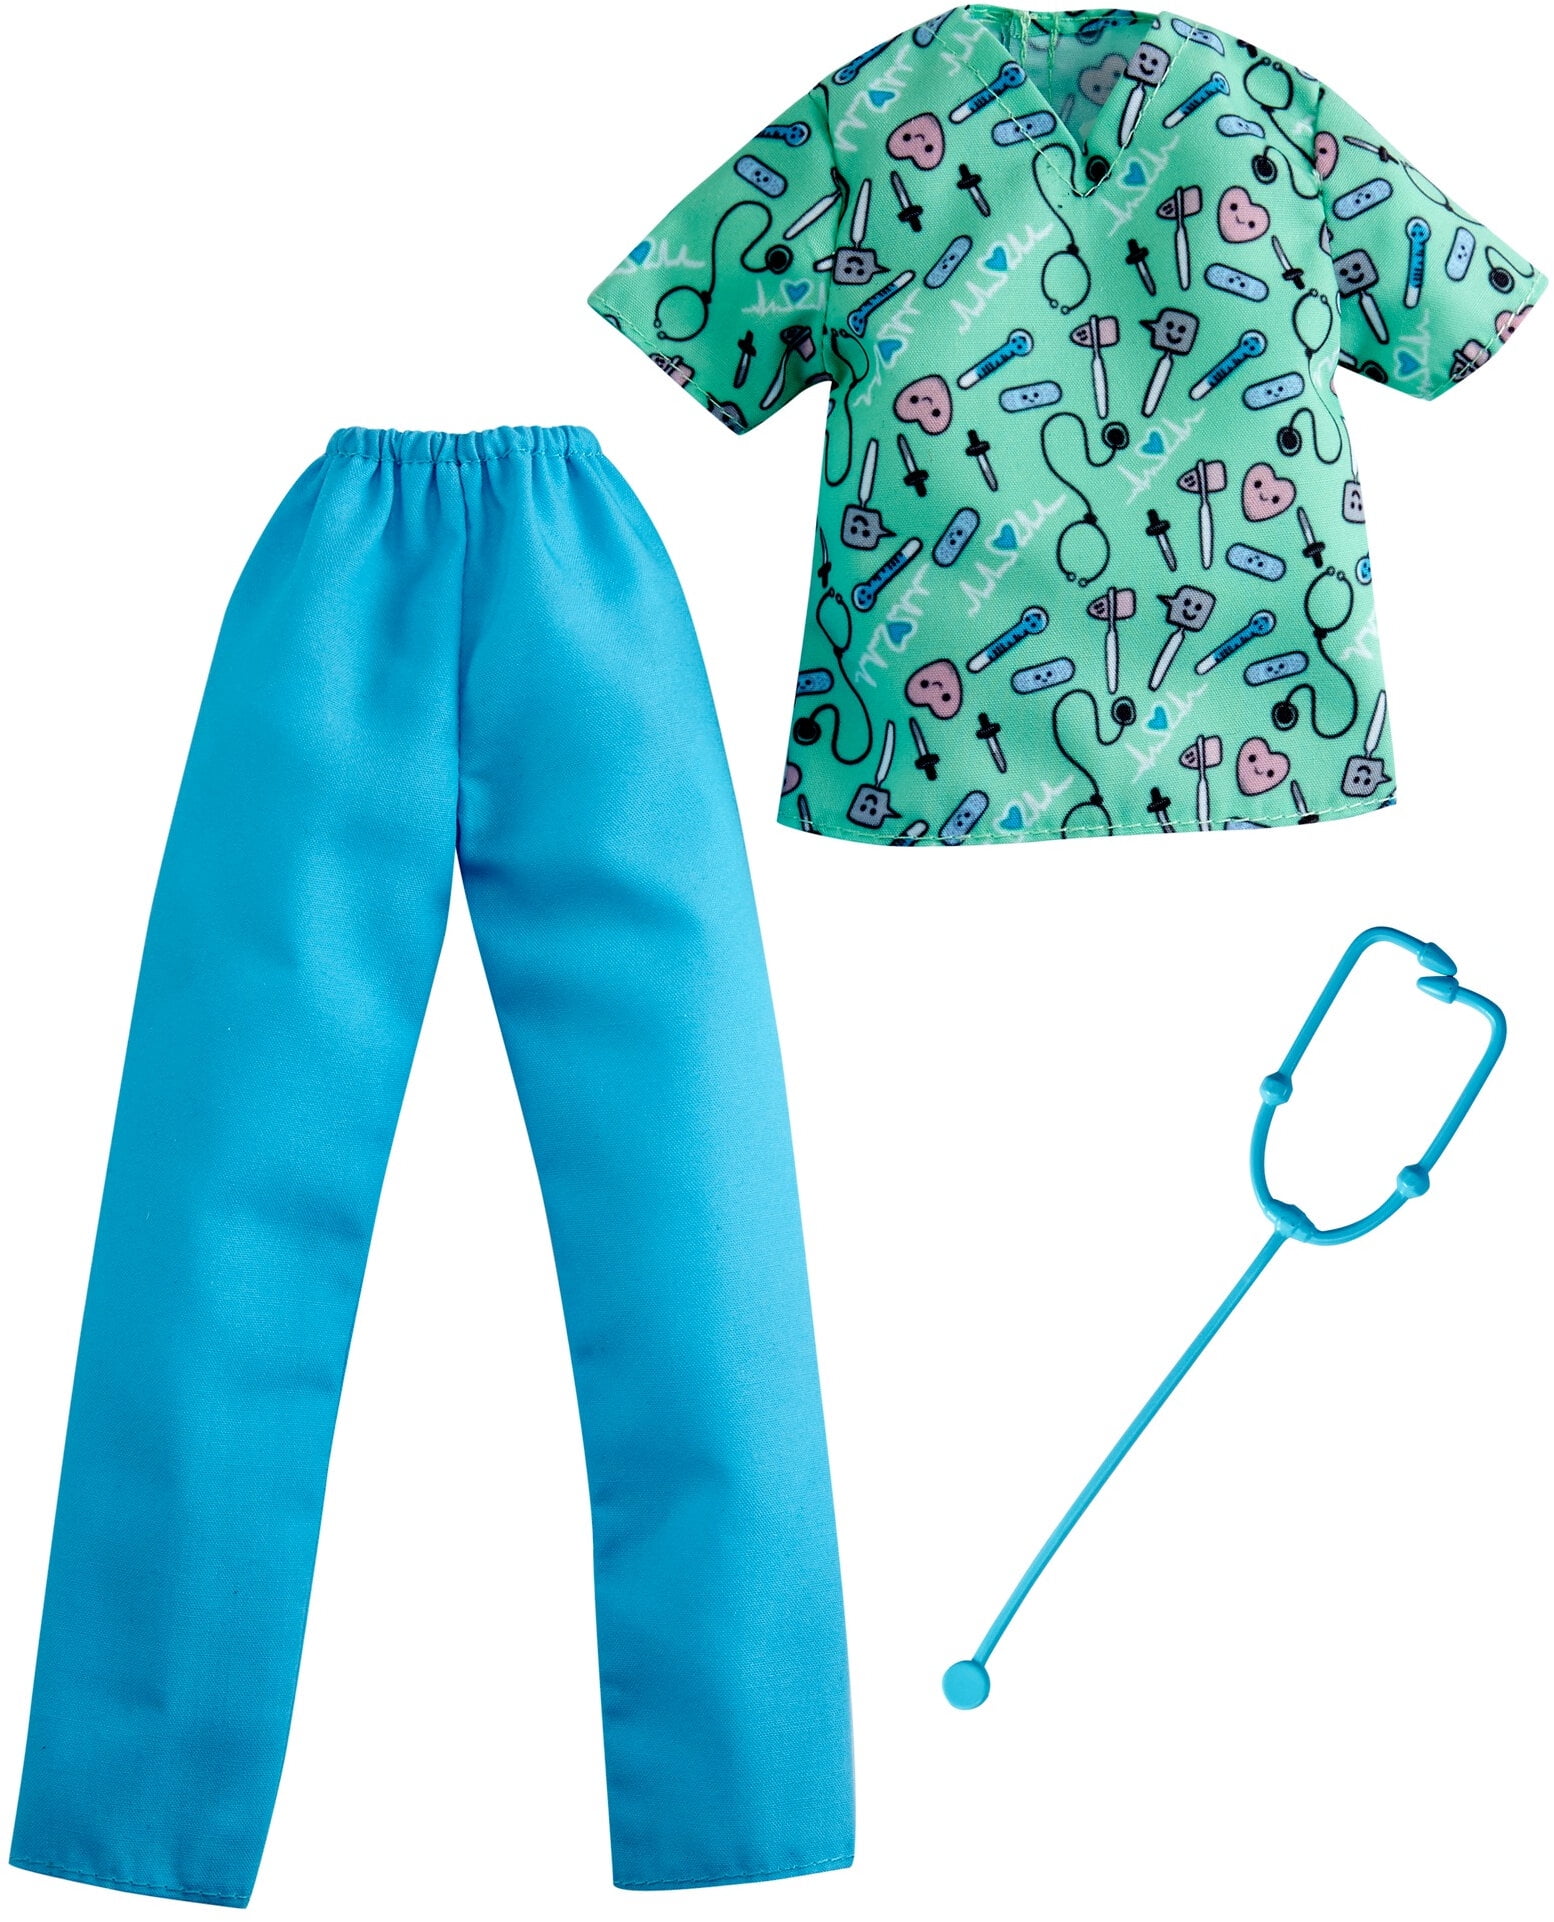 New Barbie Doctor Outfit For Ken Doll FREE SHIPPING